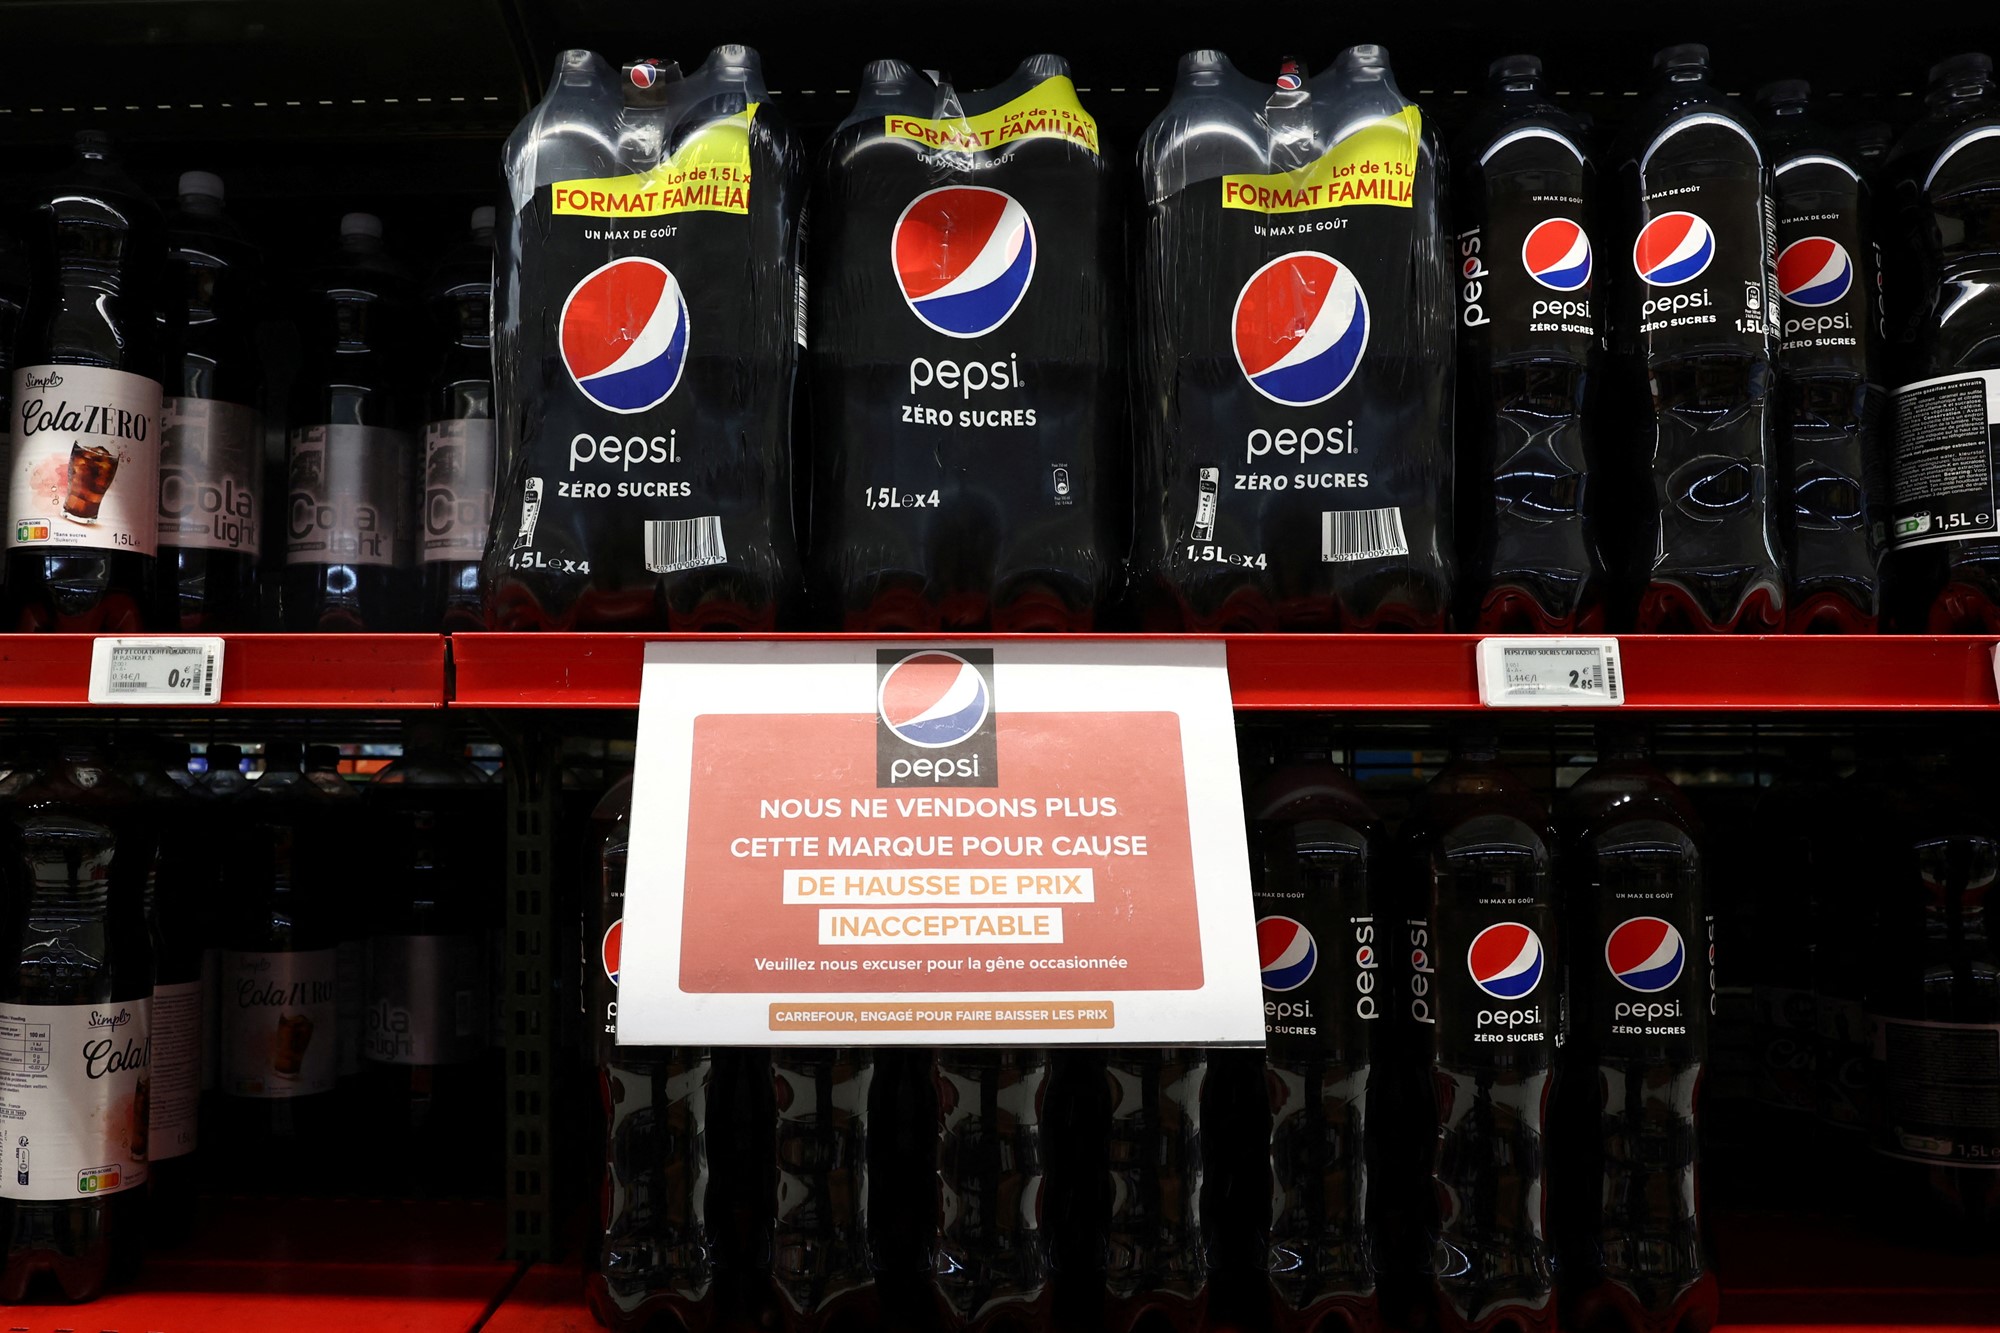 A shelf in a supermarket stocked with large bottles of Pepsi Max. A sign is fixed to the front of the shelf in French, which translates to telling customers that the products will no longer be stocked in the supermarket due to unacceptable price increases.